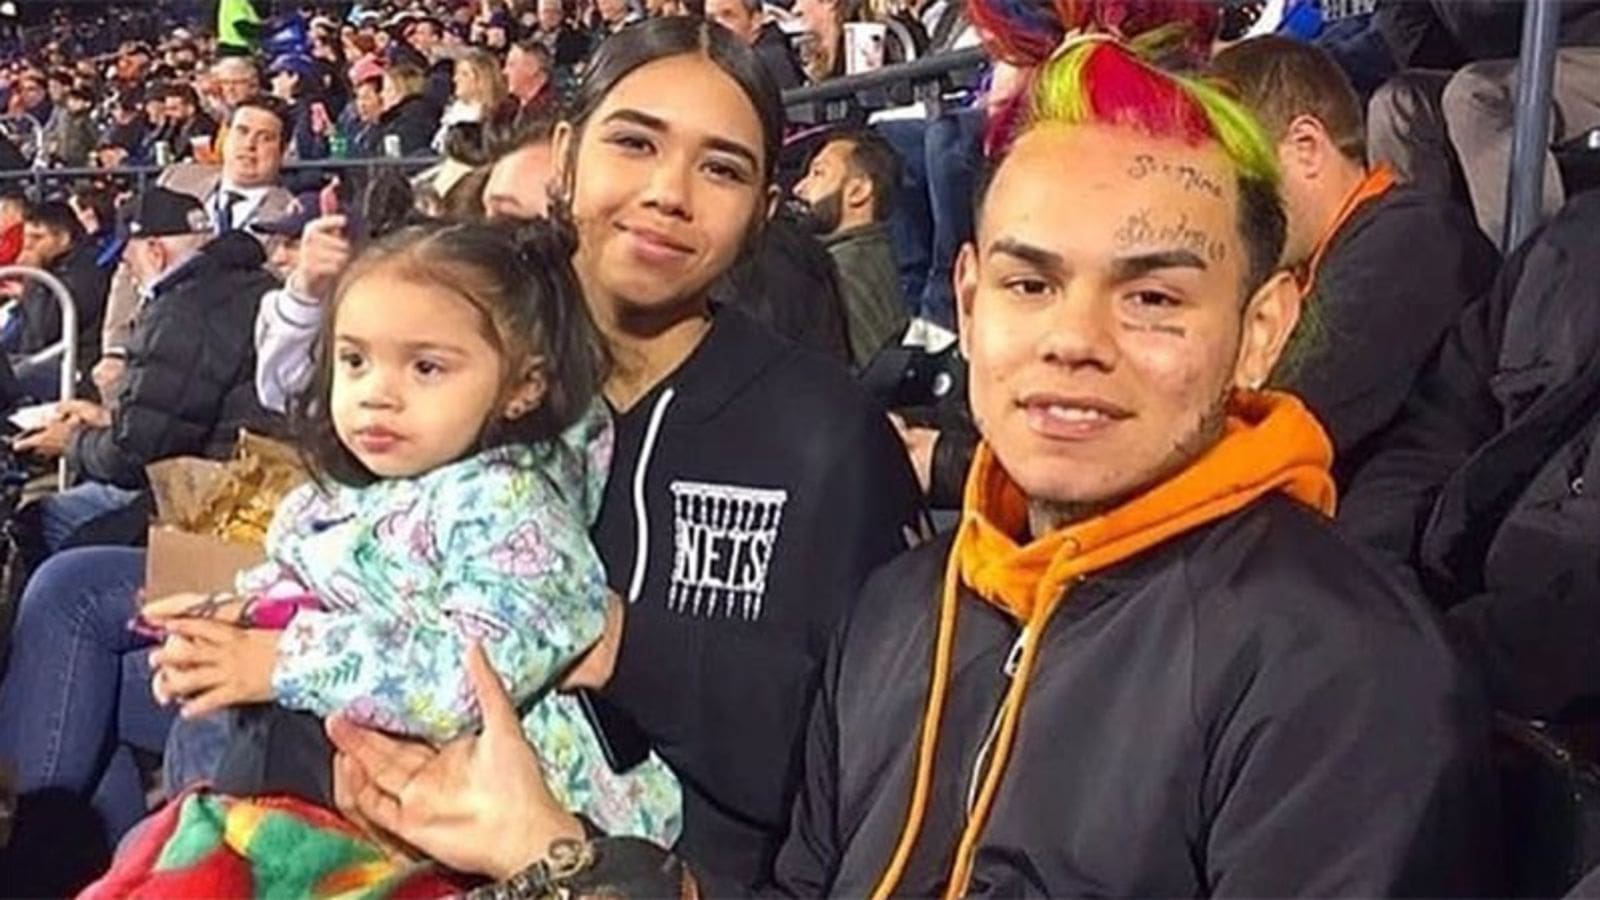 Tekashi 69's Baby Mama, Sara Molina Defends The Rapper: 'He's Not A Pedophile' - Watch The Video